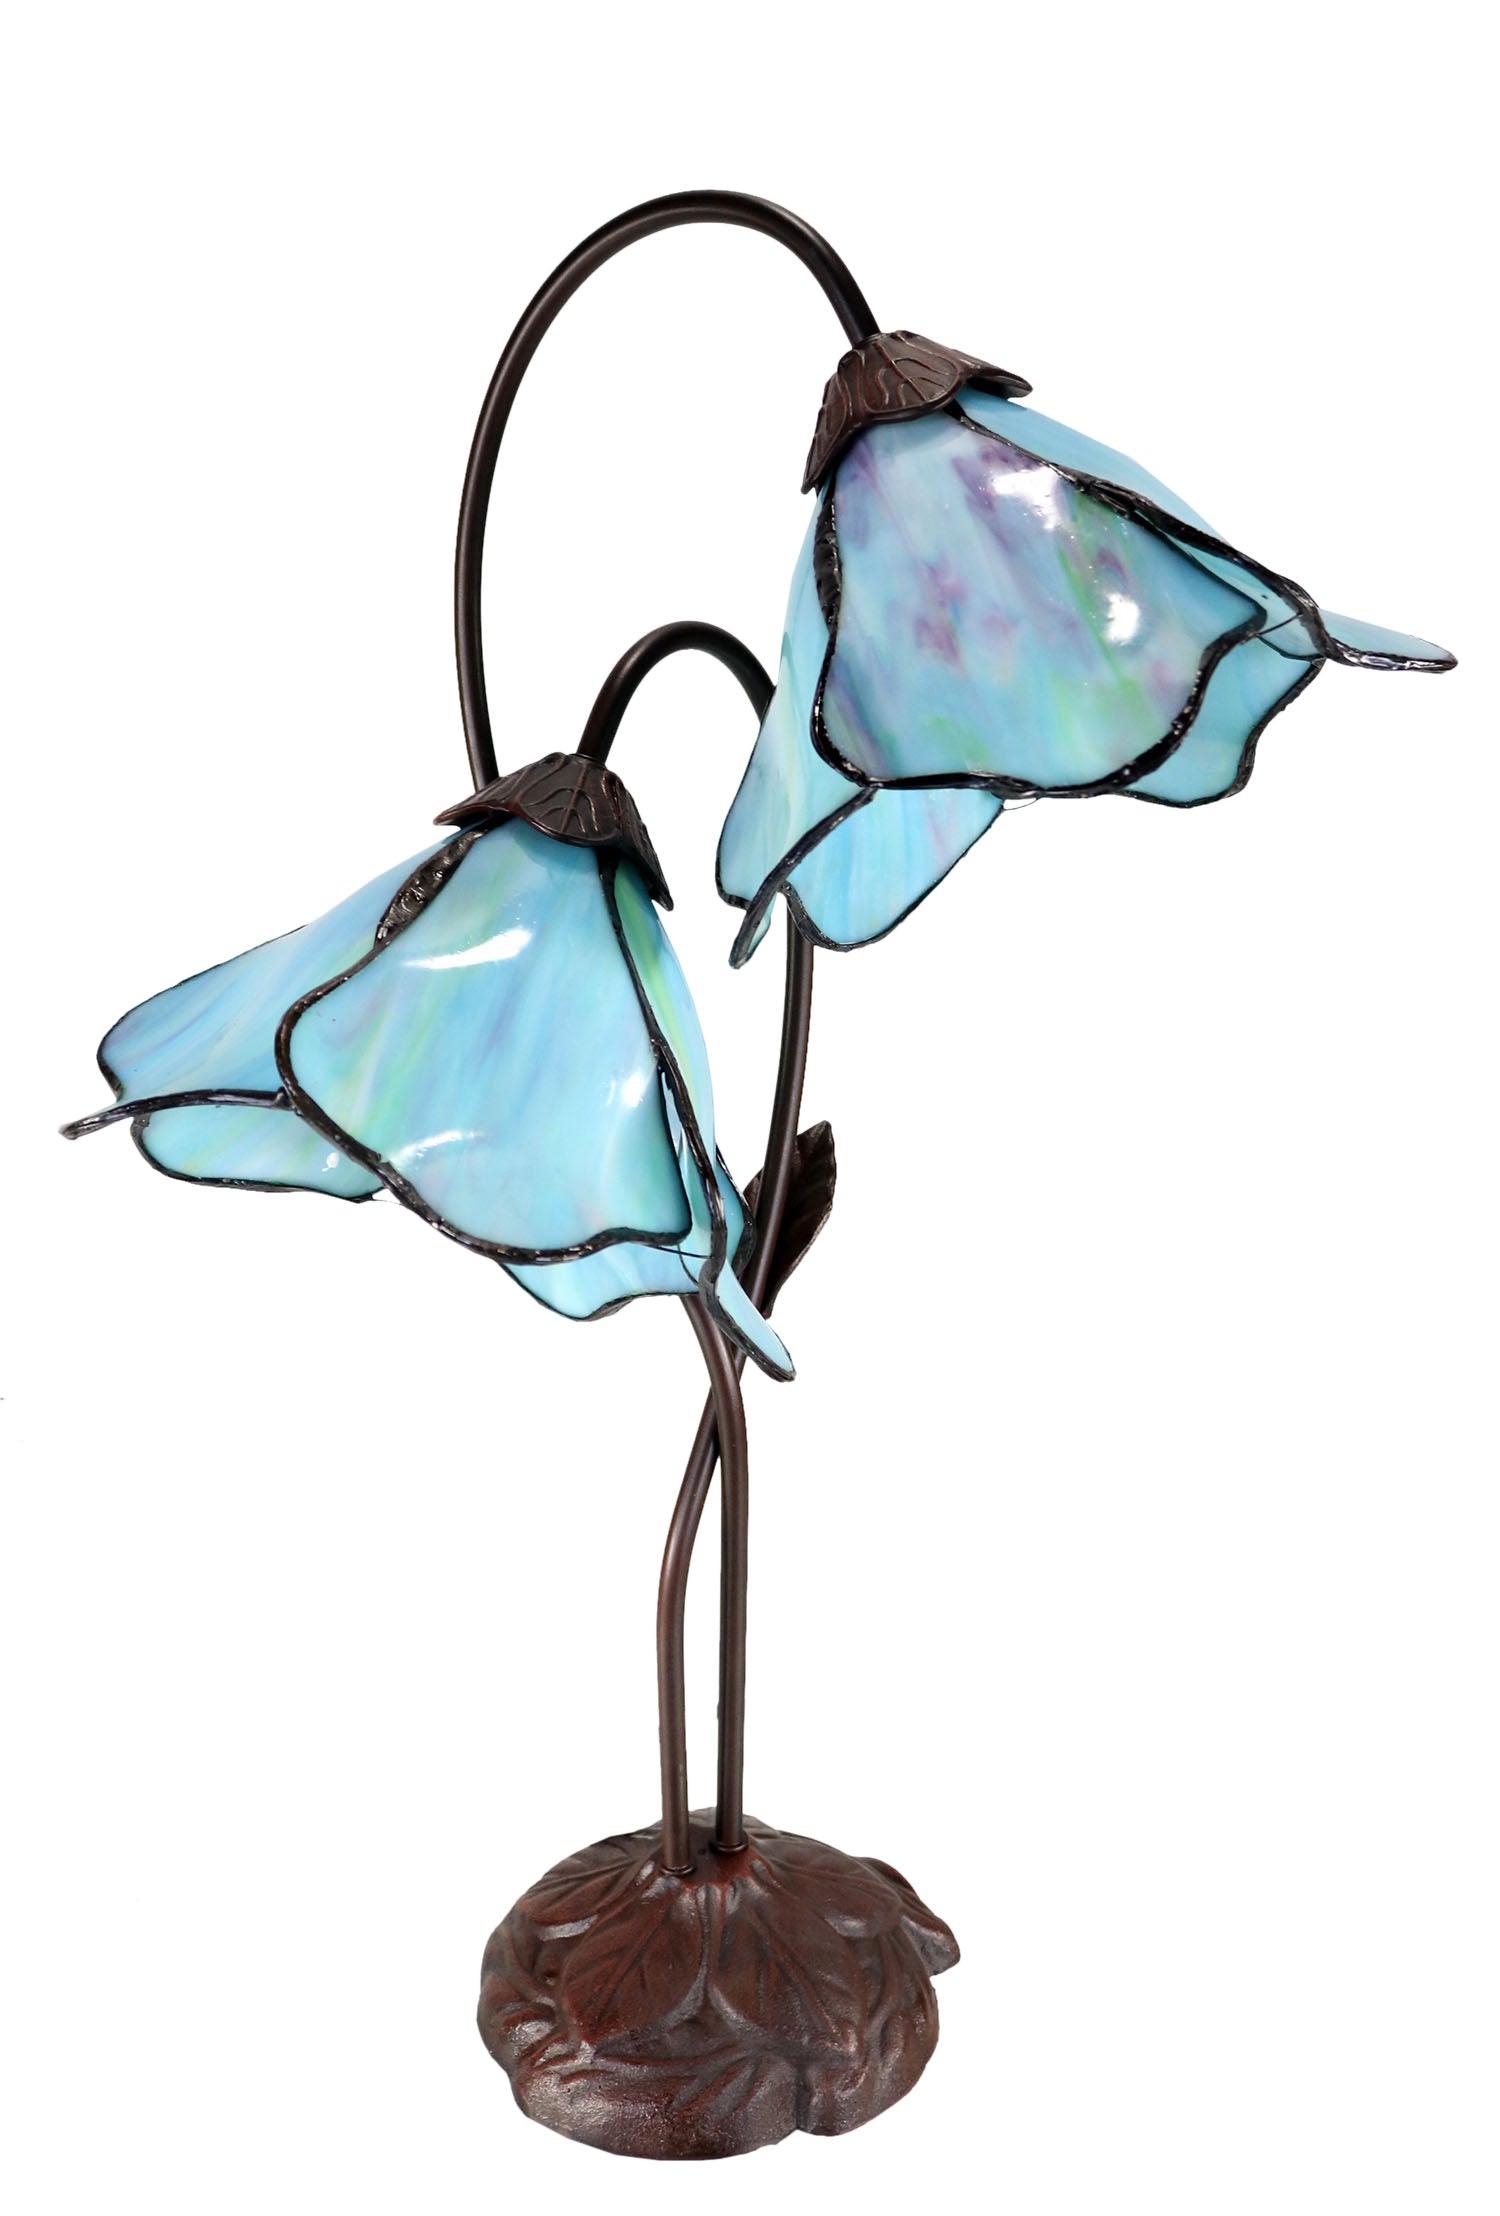 Double Lamp shade Flower  Water Lily Style Tiffany Table Lamp*Aqua Blue-Purple-Green